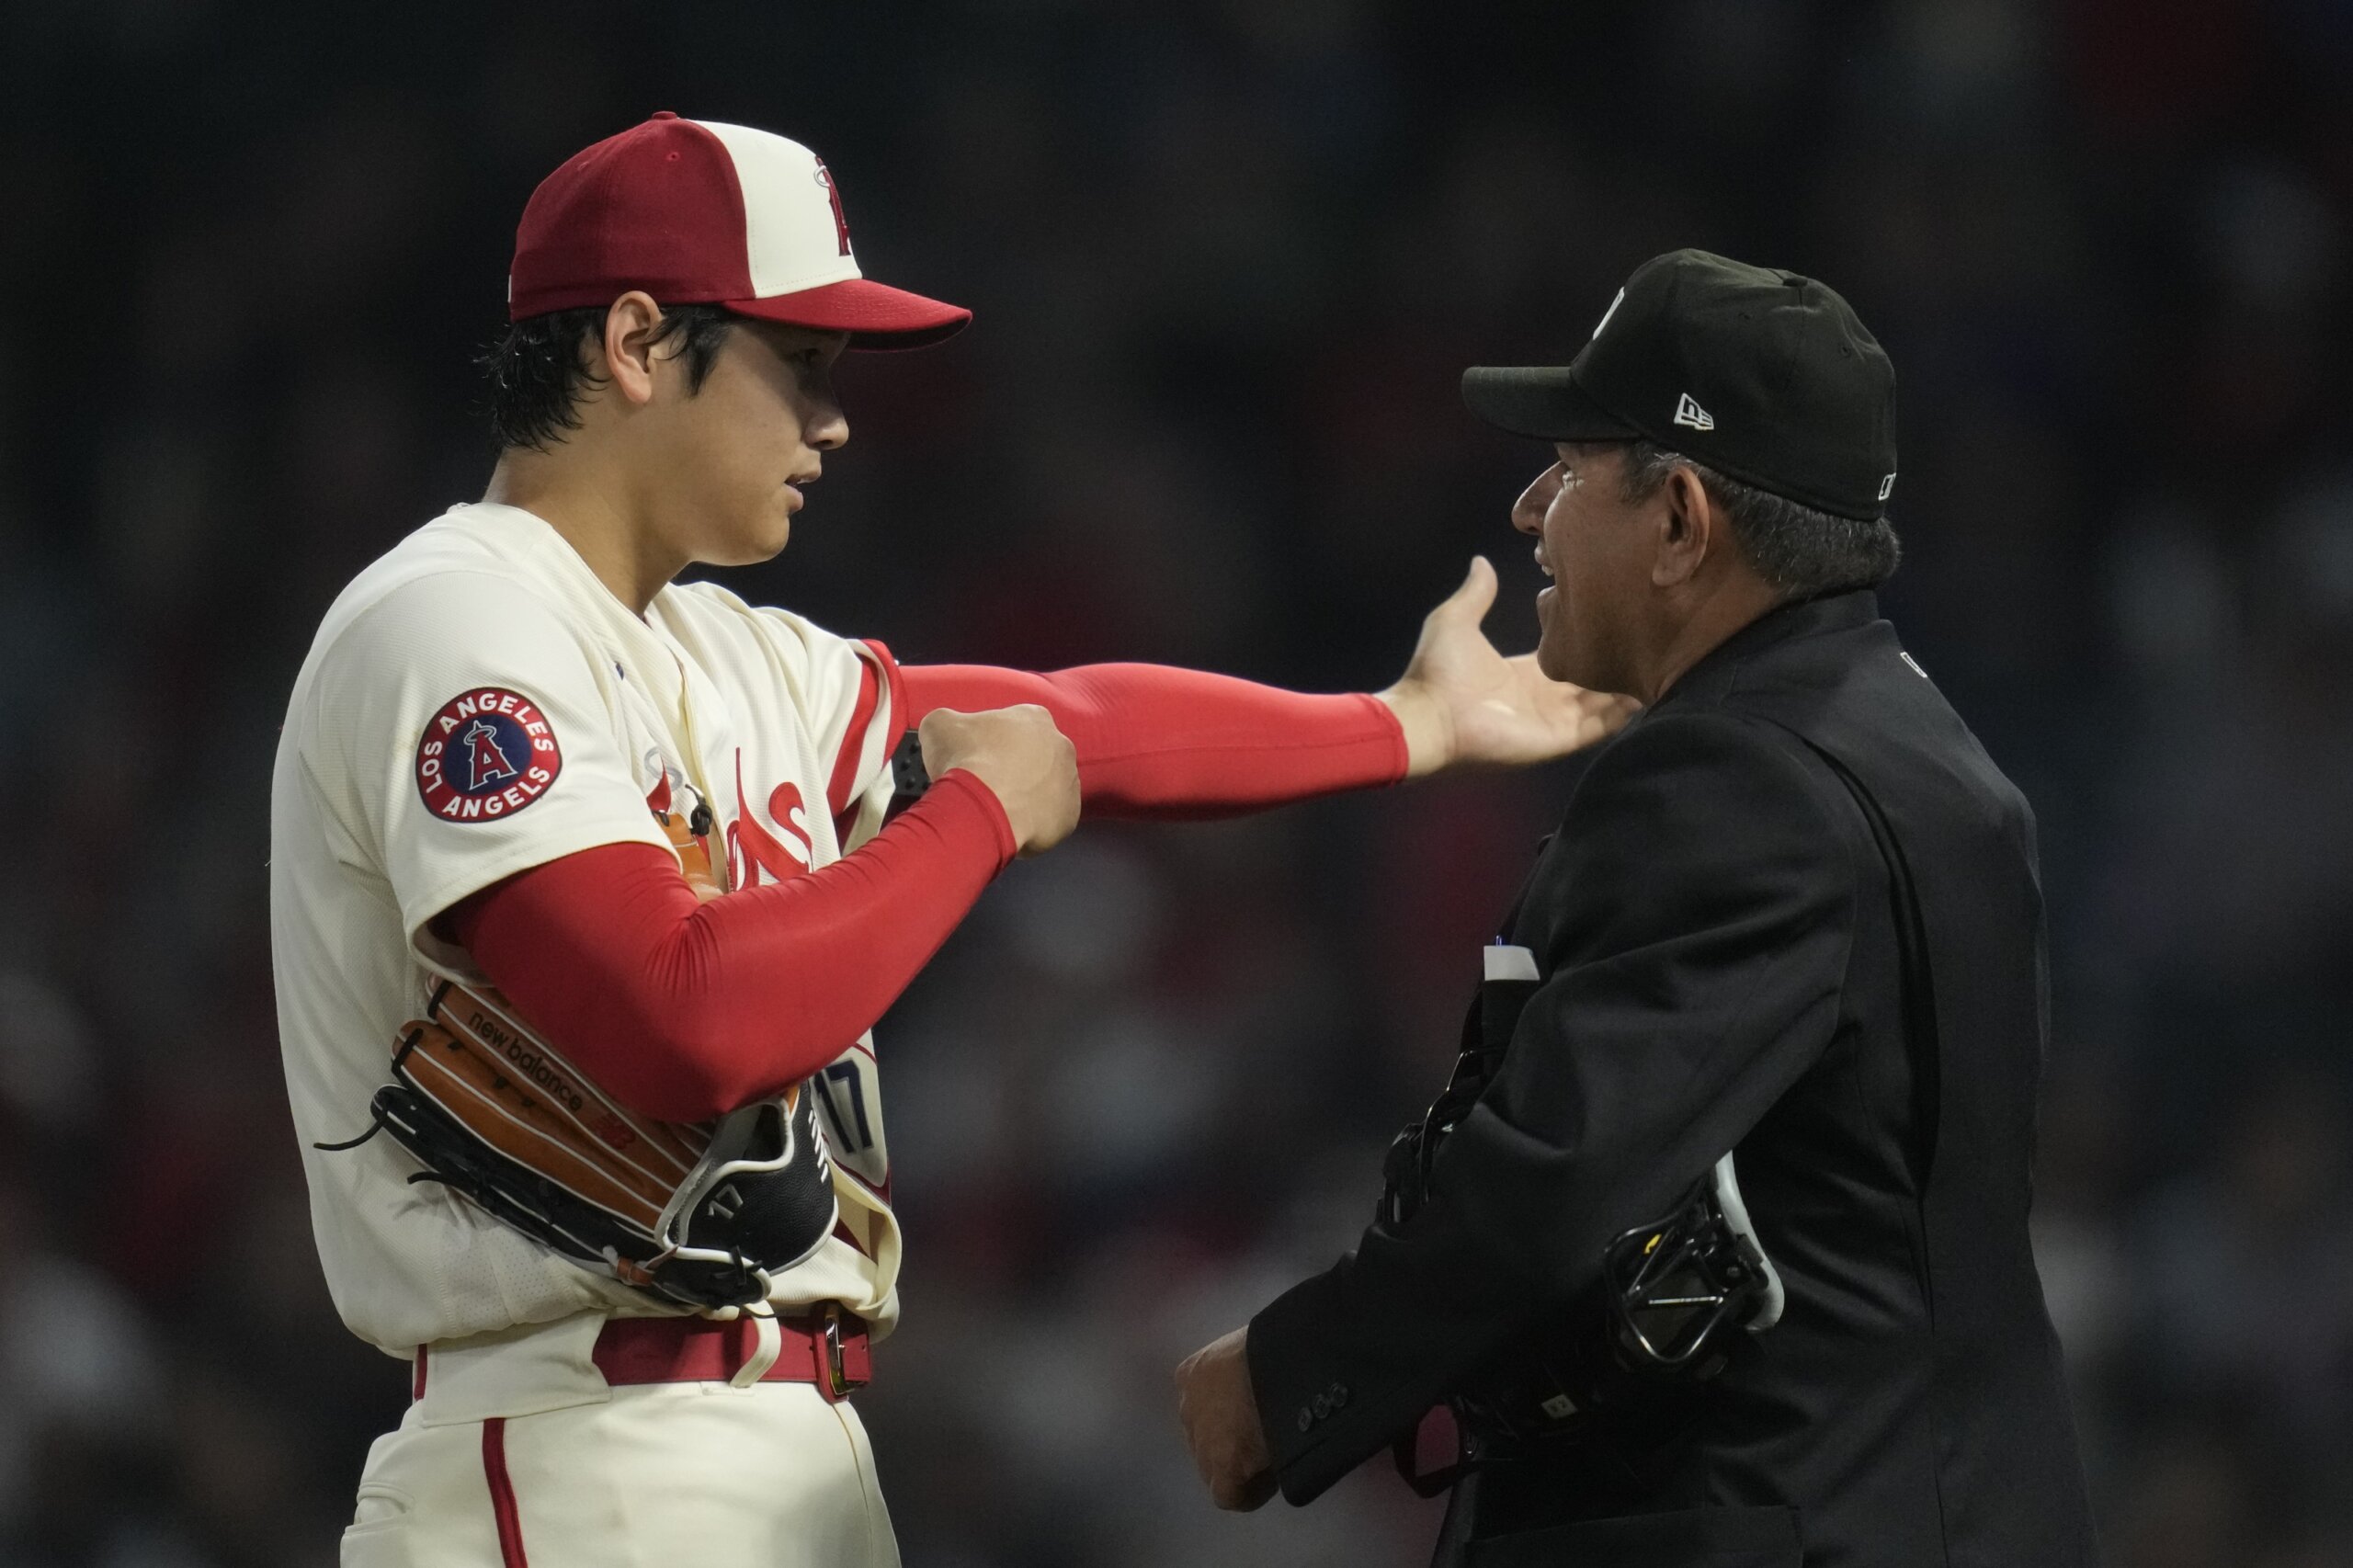 Baseball: Shohei Ohtani's big offense cannot save Angels in Los Angeles